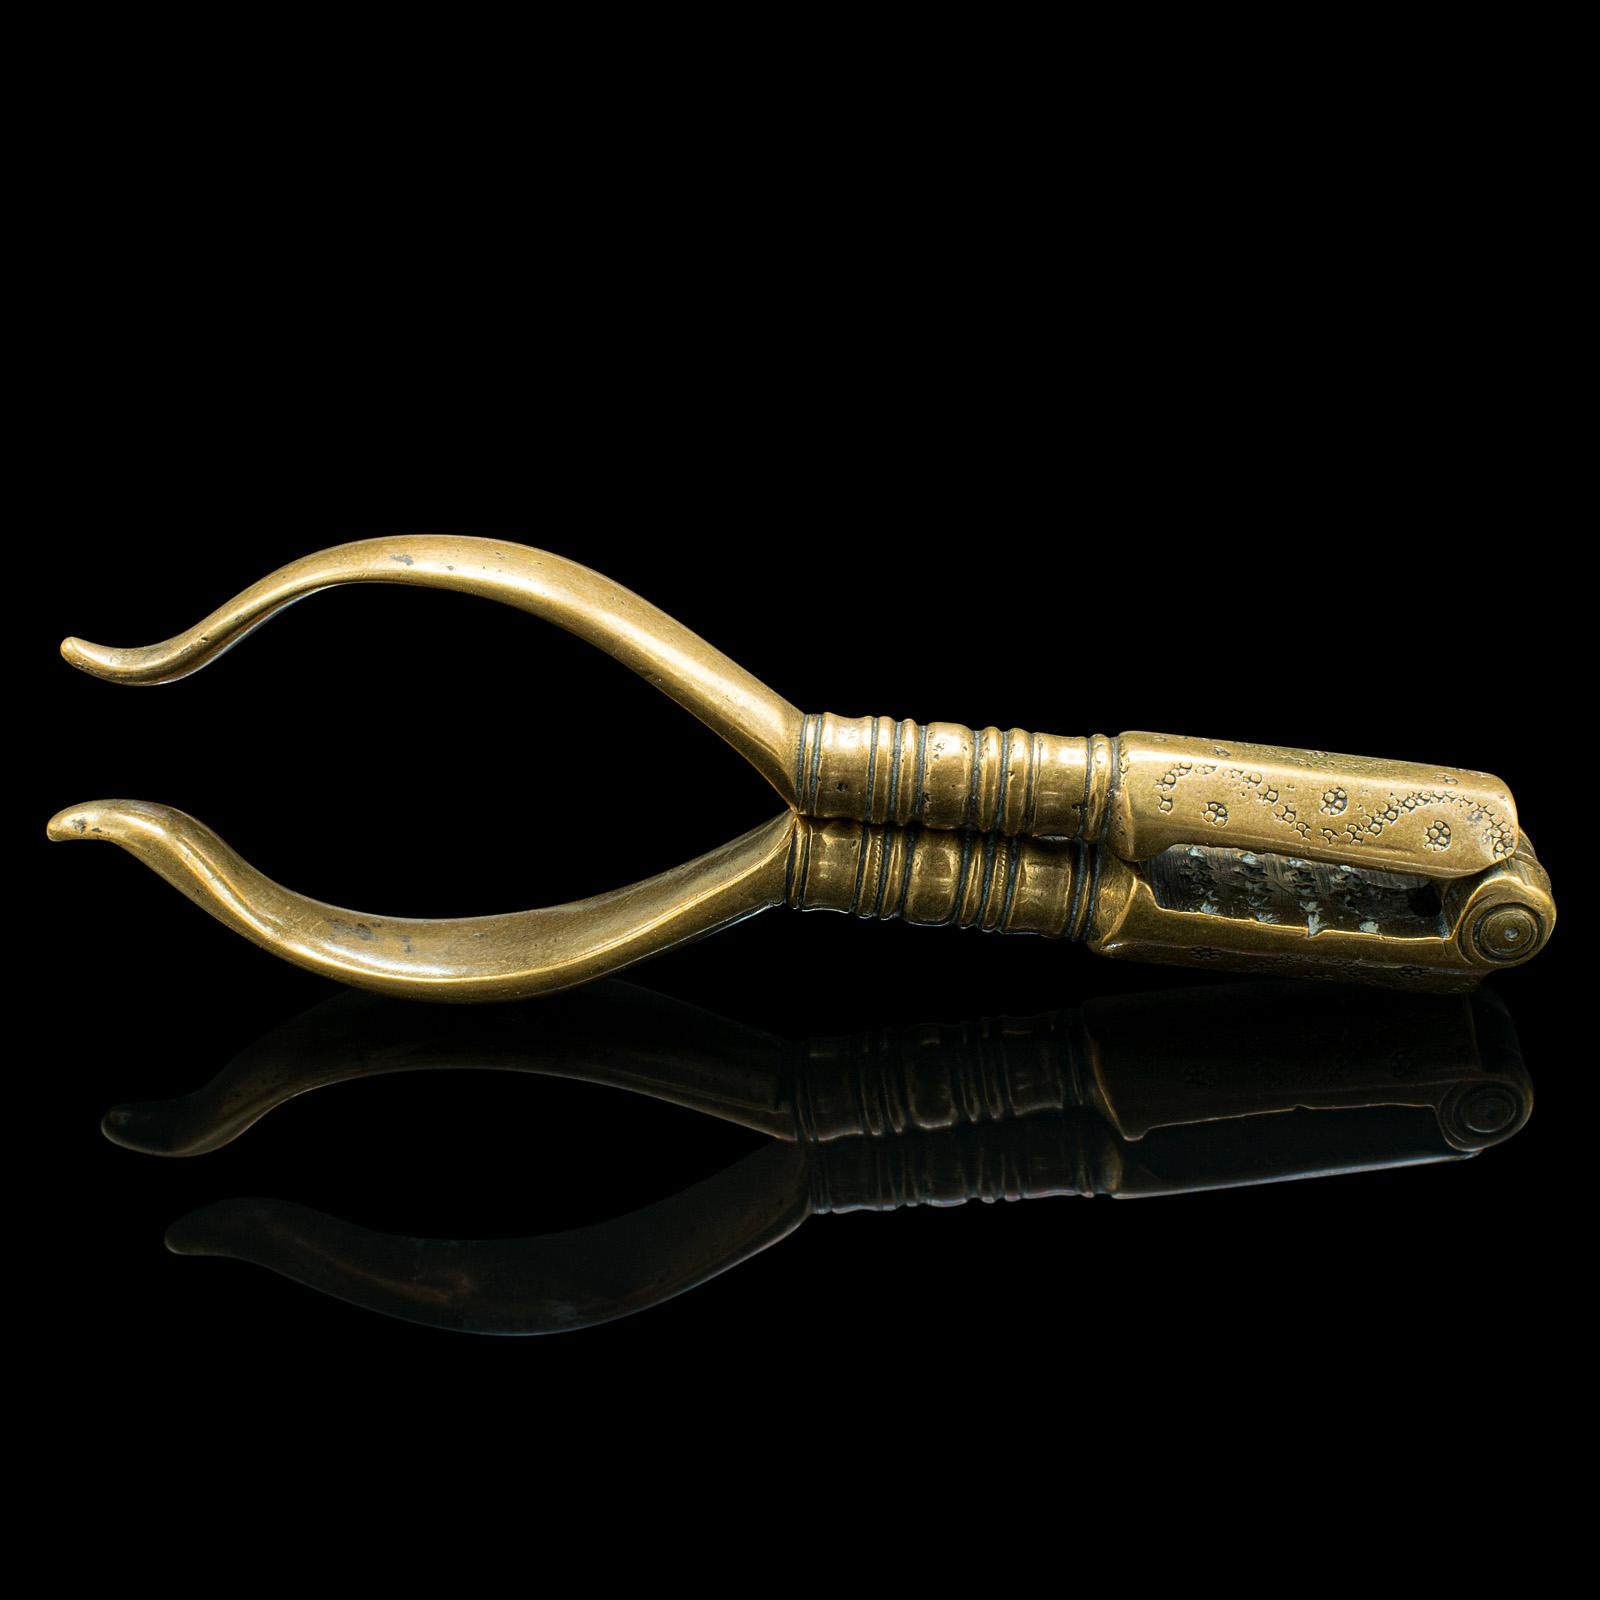 This is a small pair of antique pistachio nutcrackers. An English, brass hand tool, dating to the Georgian period, circa 1800.

Charmingly diminutive with appealing Georgian craftsmanship
Displaying a desirable aged patina and in good order